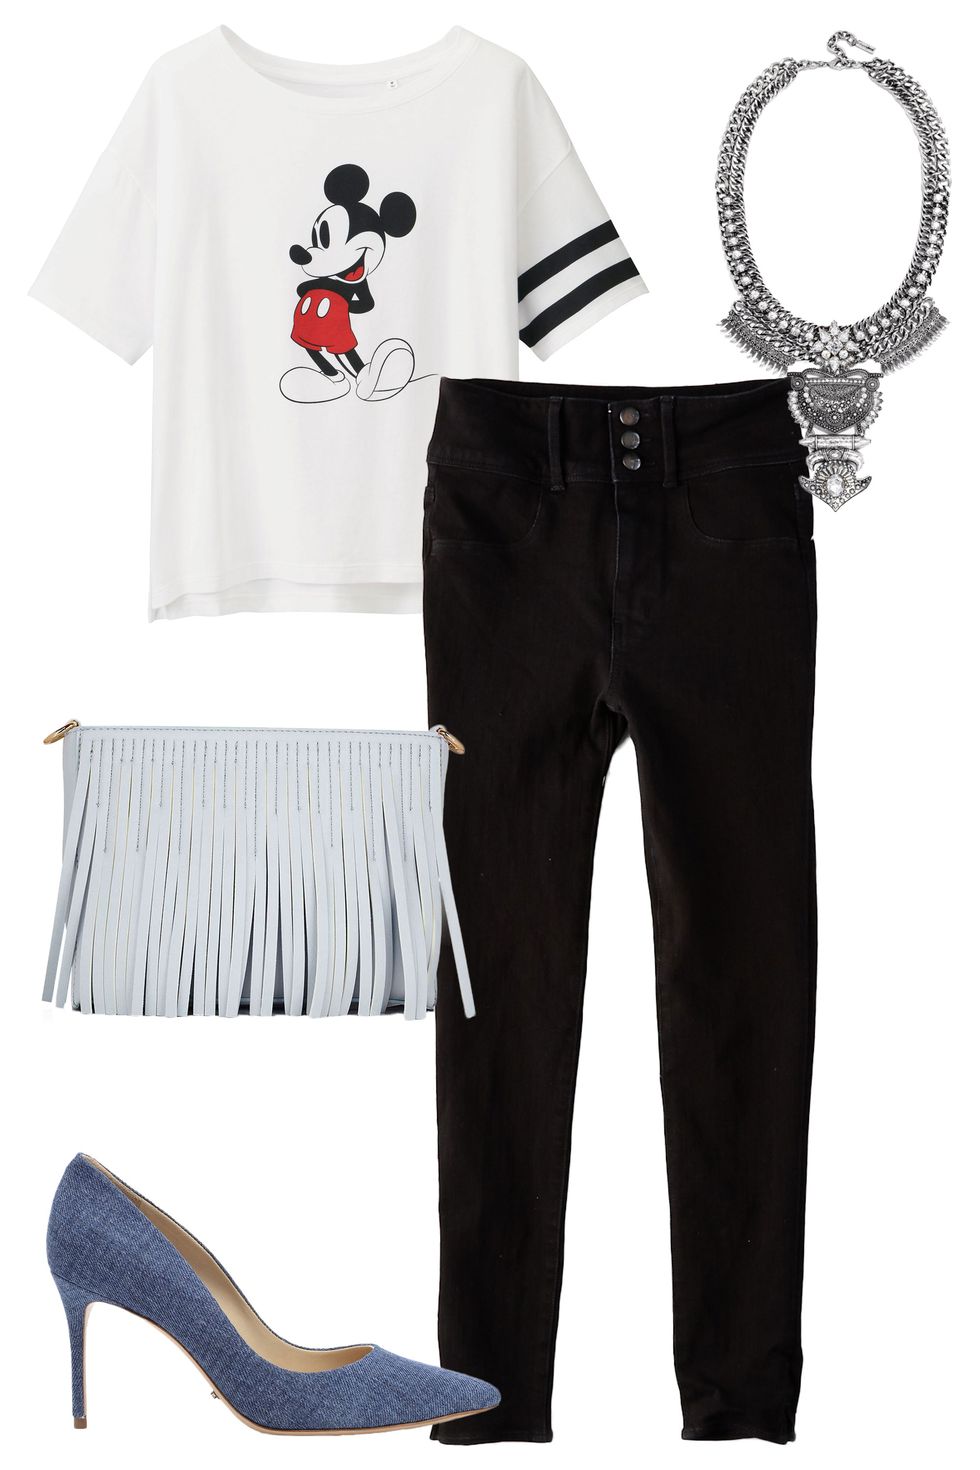 coach x disney-4  Jeans outfit casual, Sweatshirt outfit, Shoes outfit  fashion